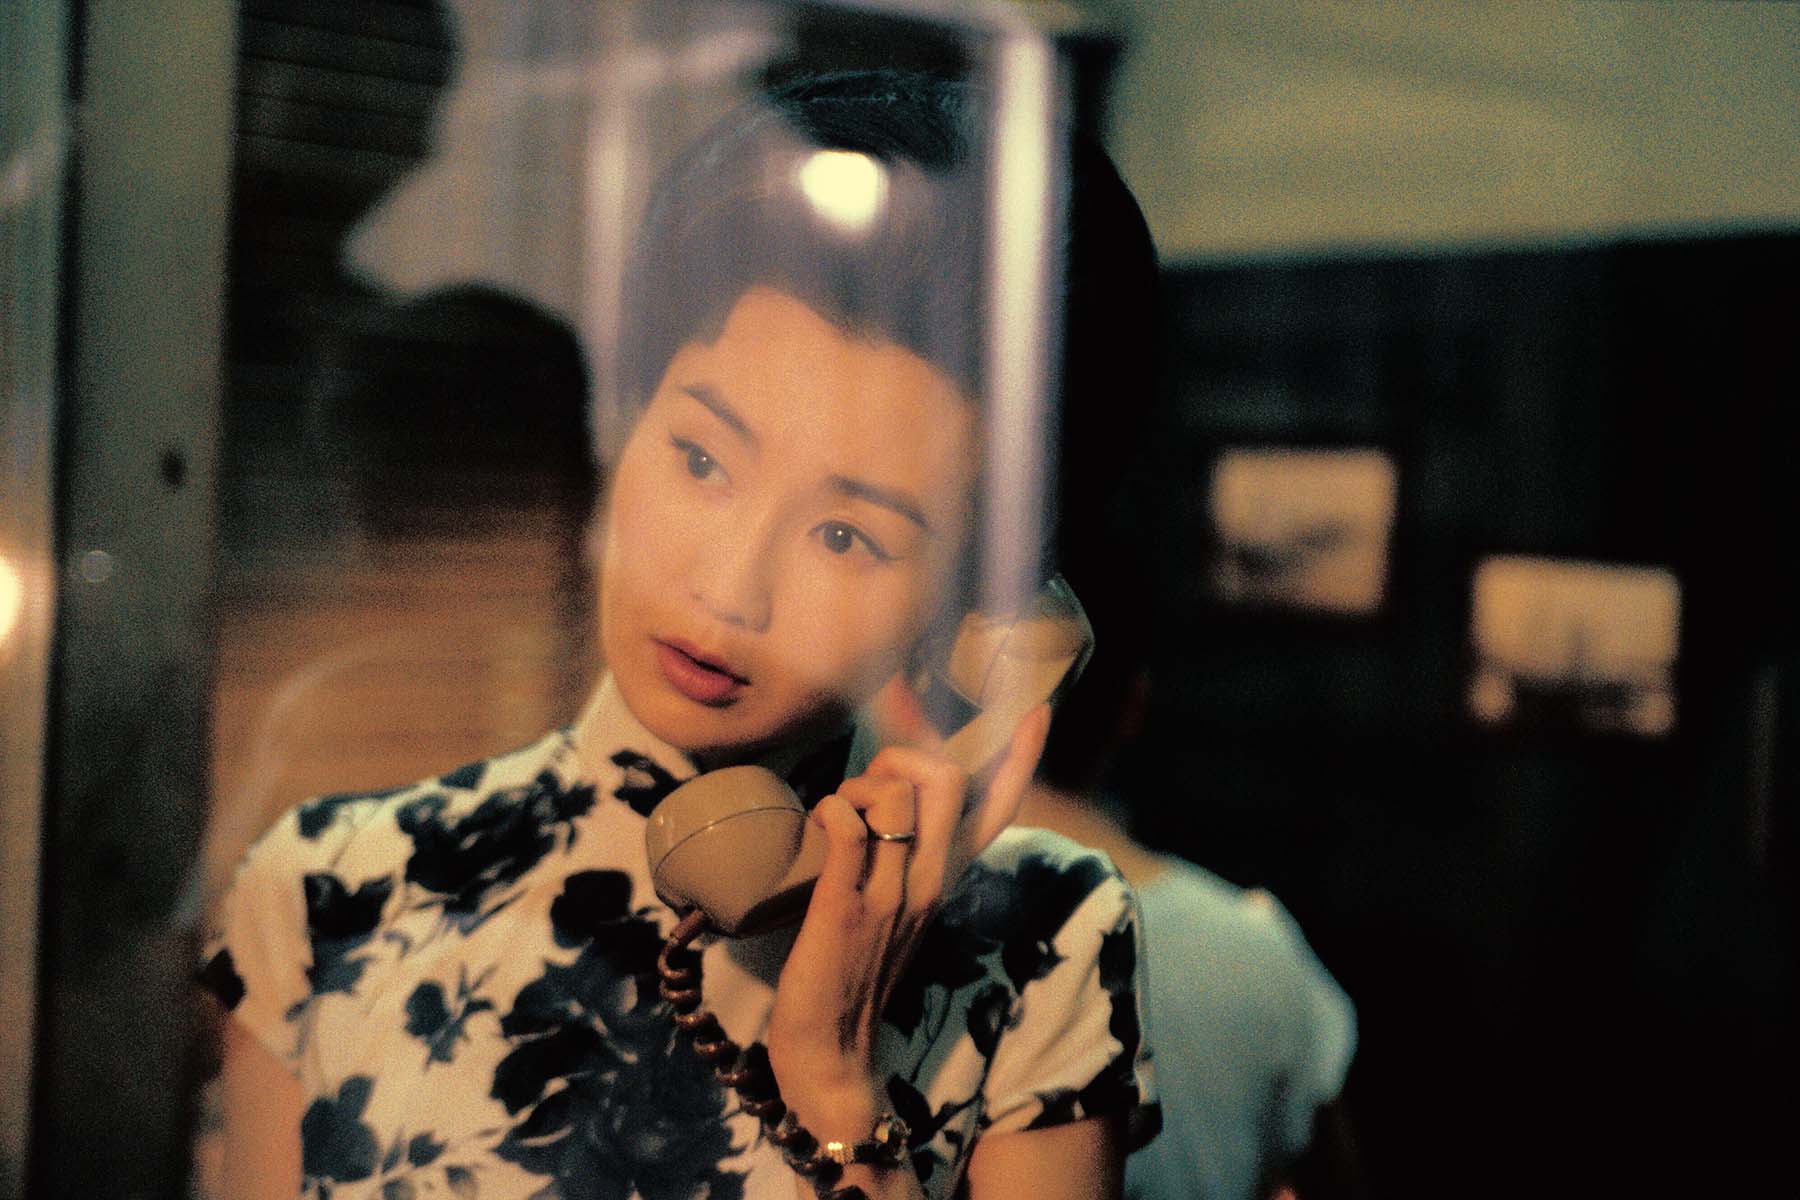 A woman holds the receiver of a rotary phone while gazing out the window in a still from In the Mood for Love.